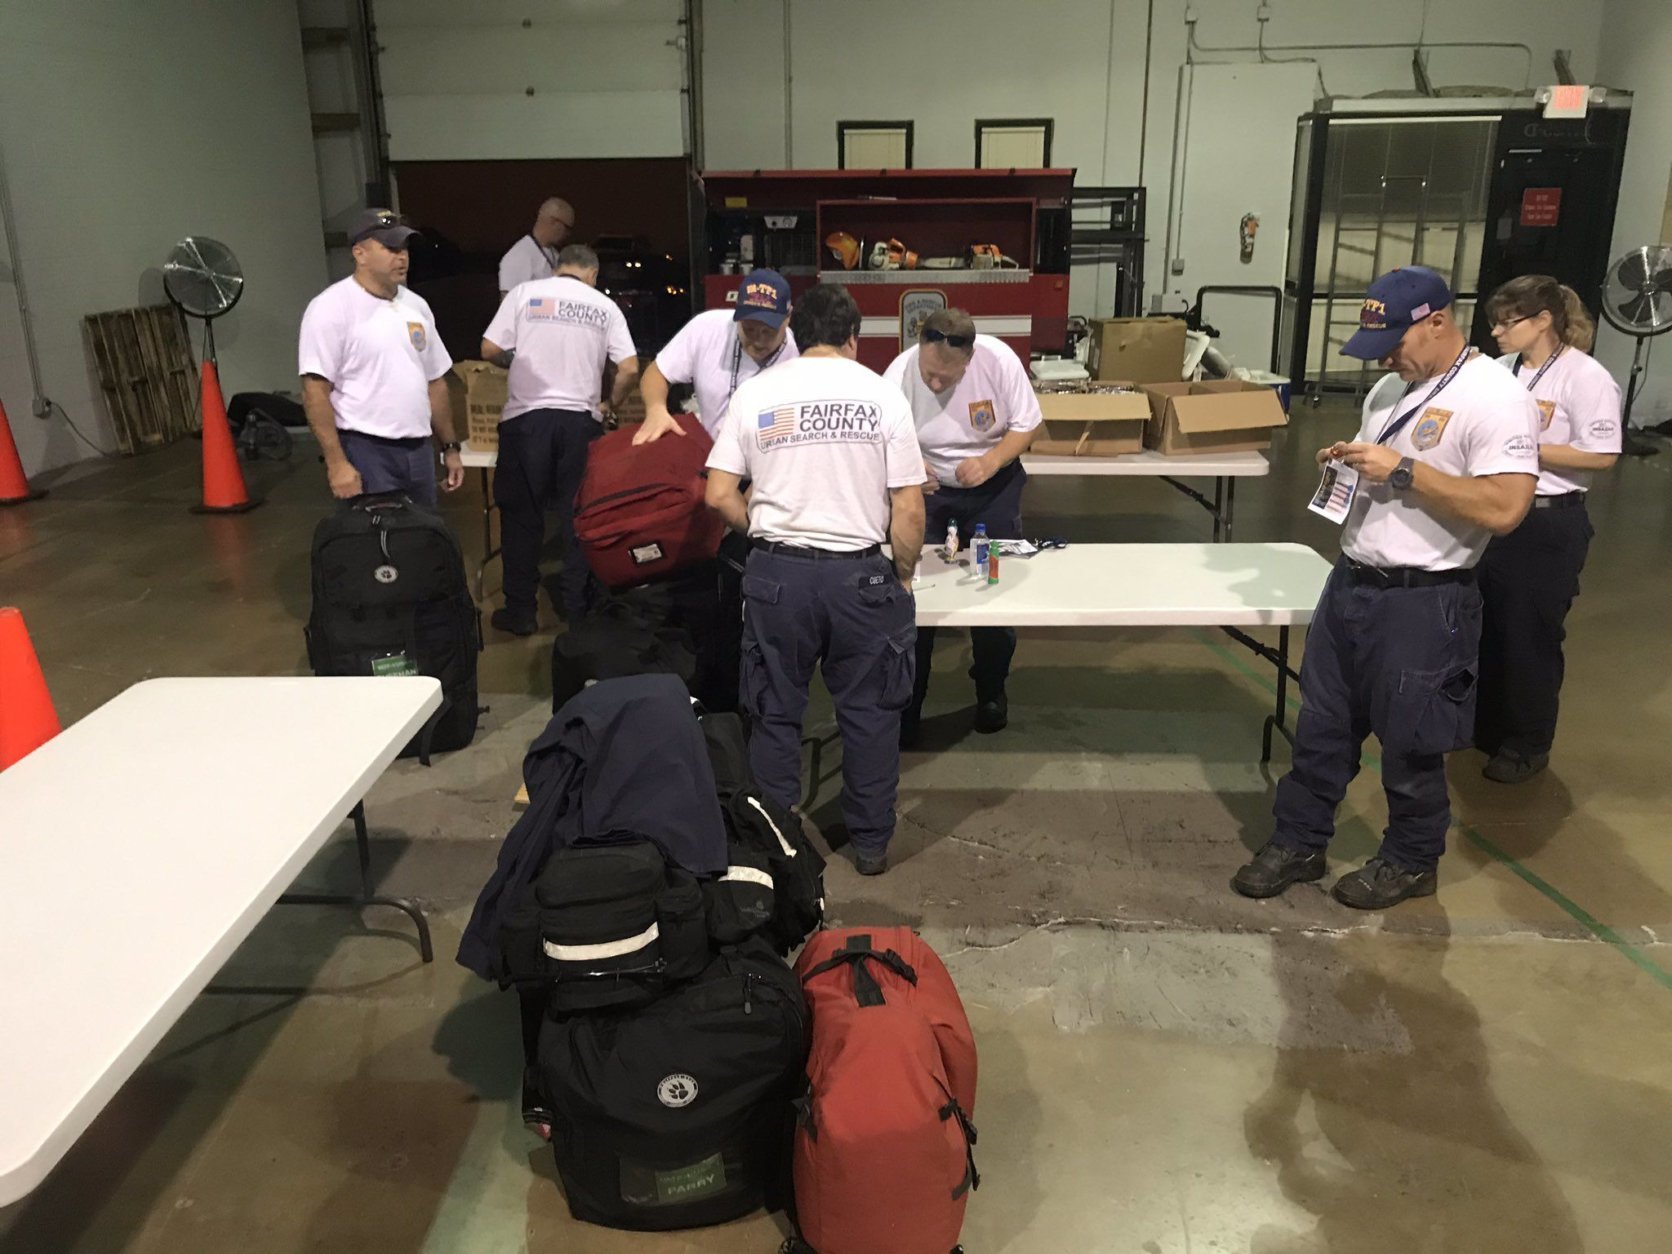 In Fairfax County, Virginia, two teams — each with 17 search and rescue personnel — readied for deployment early Tuesday. (WTOP/Neal Augenstein)